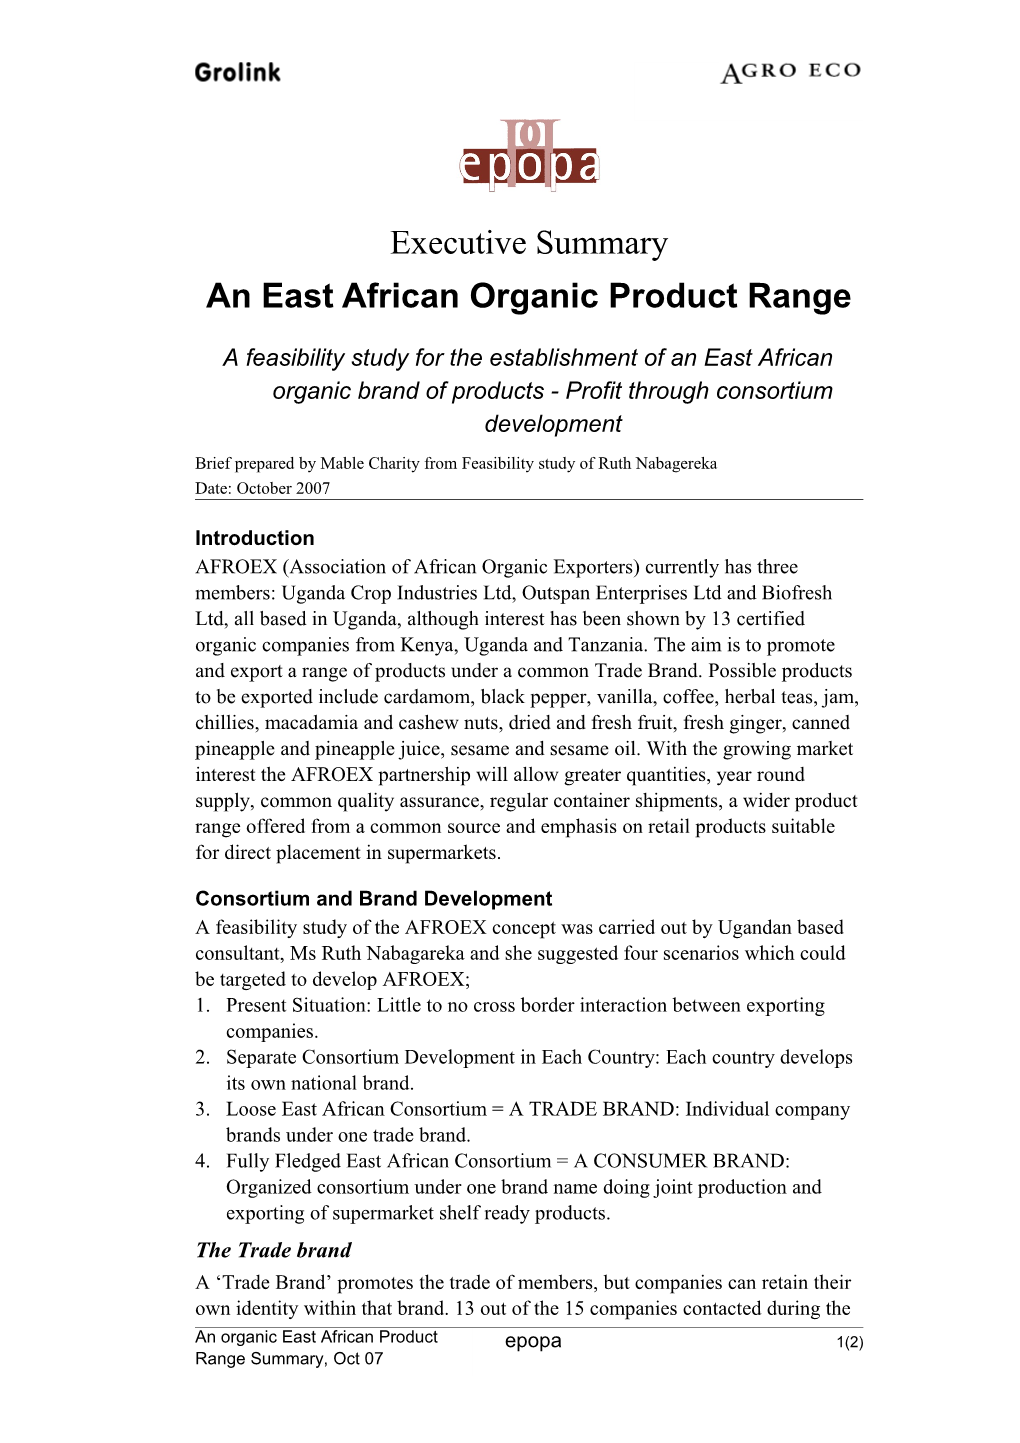 An East African Organic Product Range